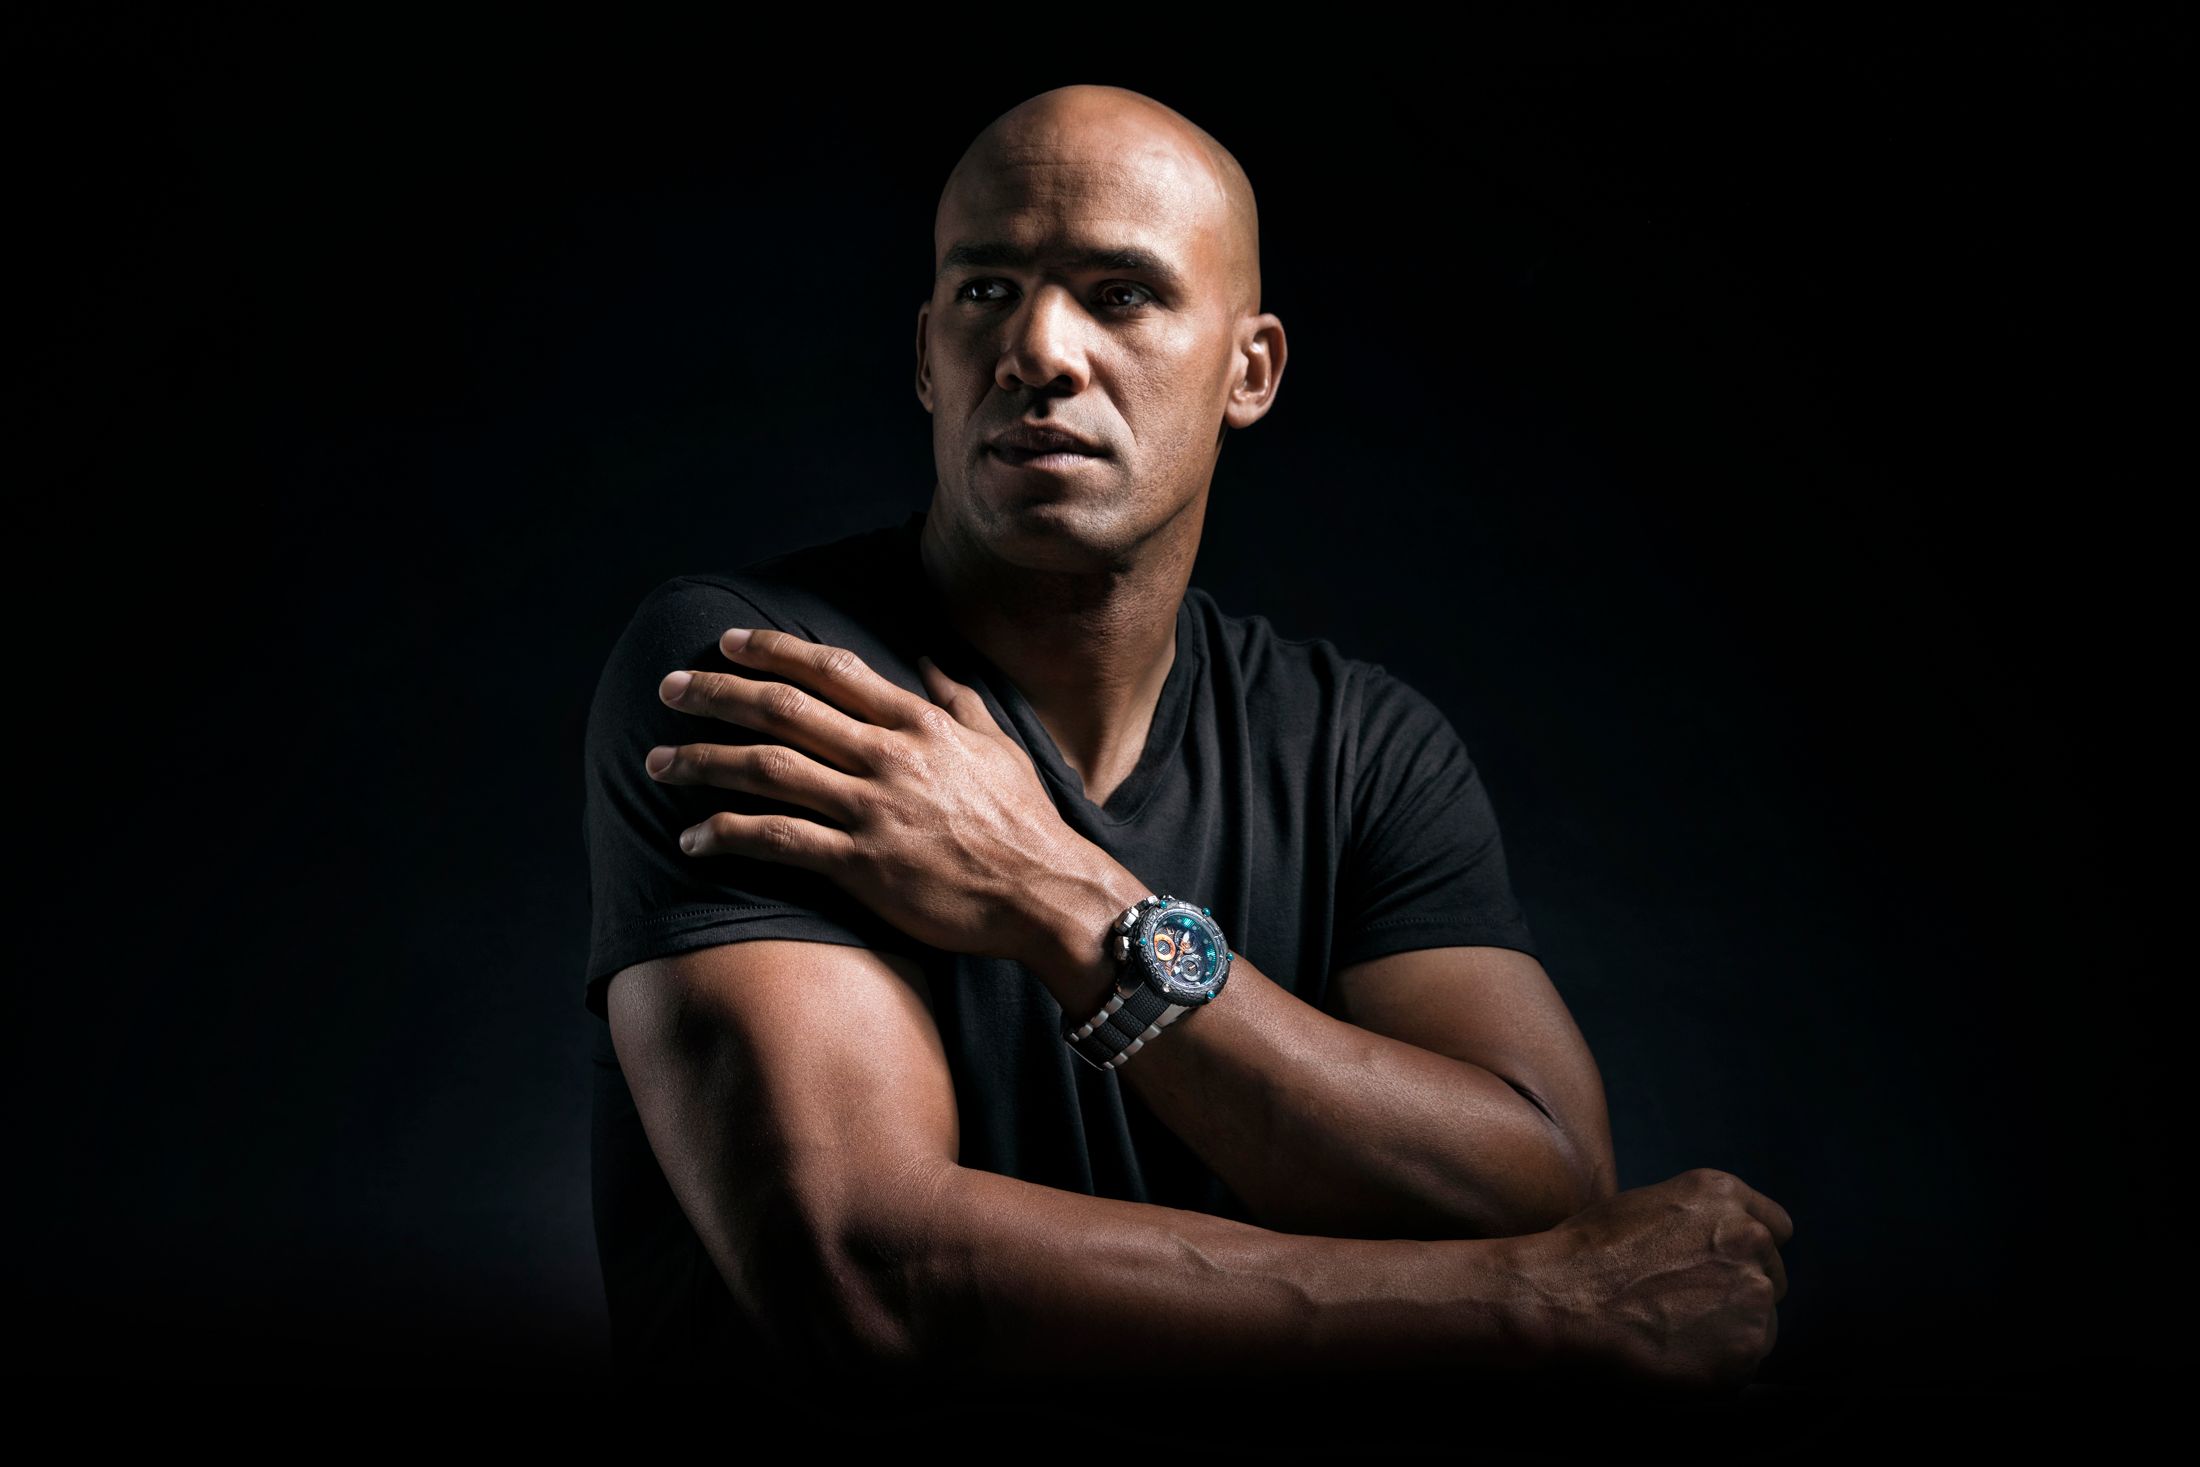 Jason Taylor for Invicta watches